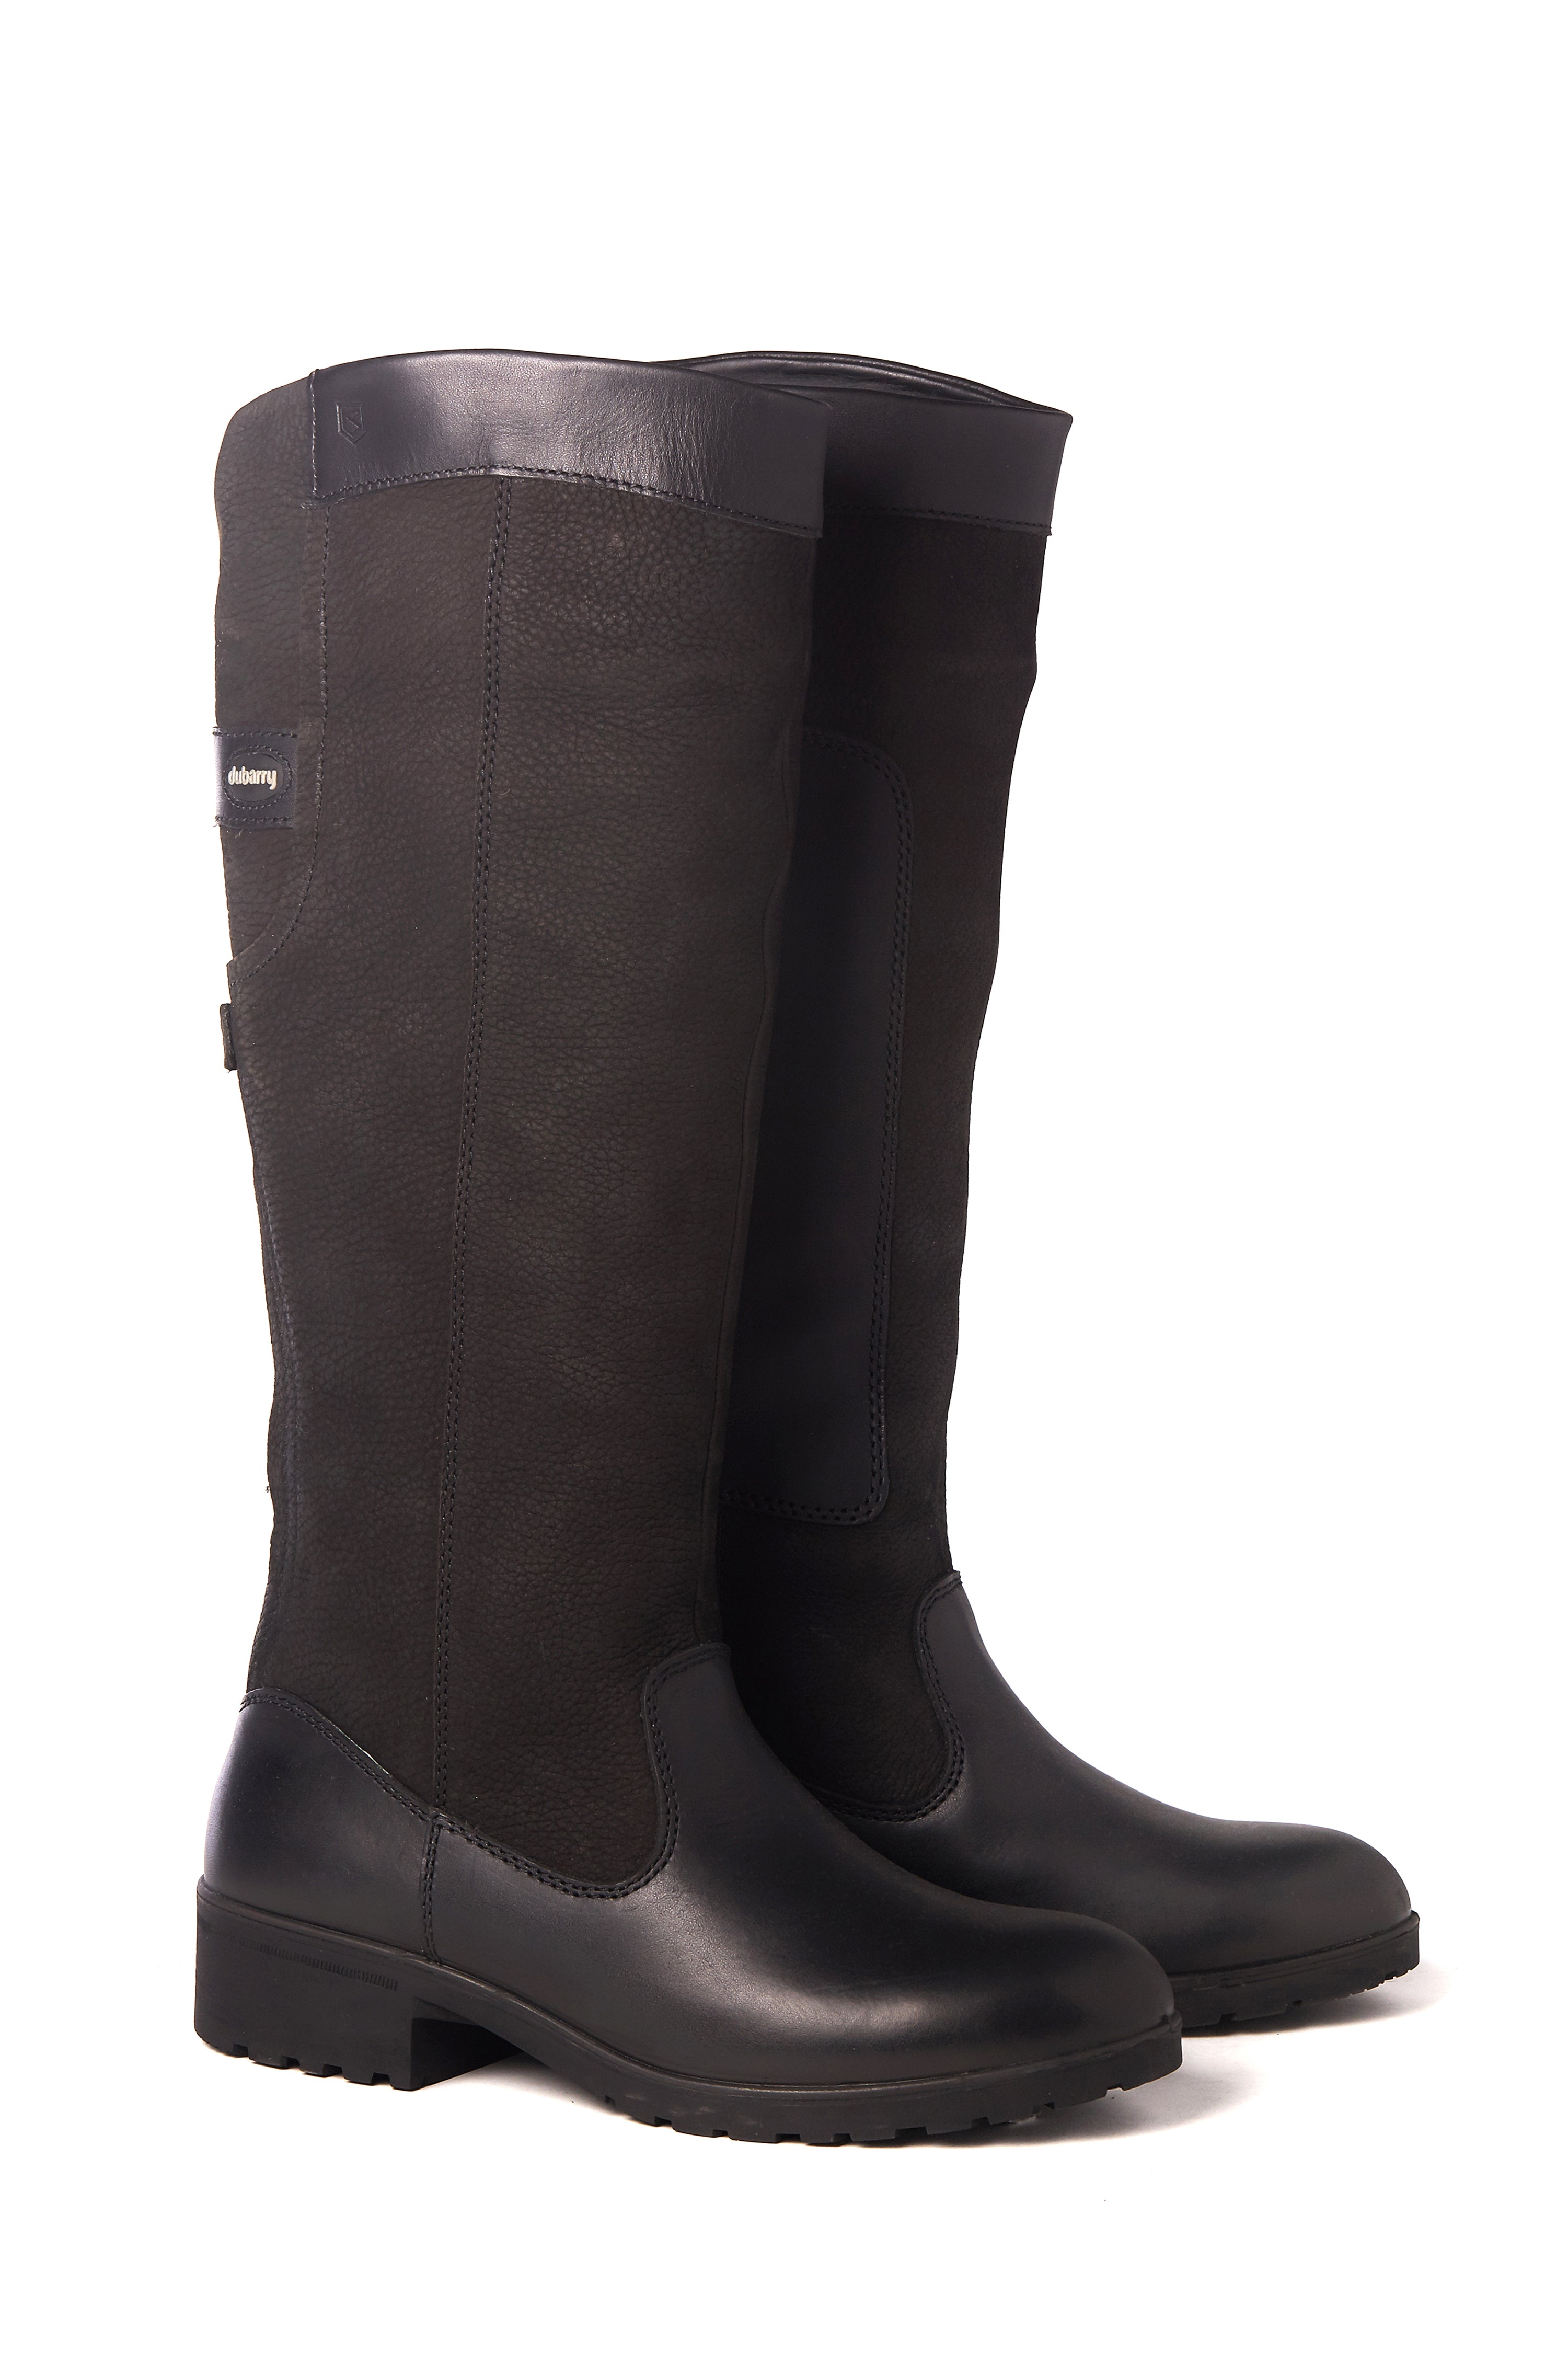 Dubarry Clare Country Boot